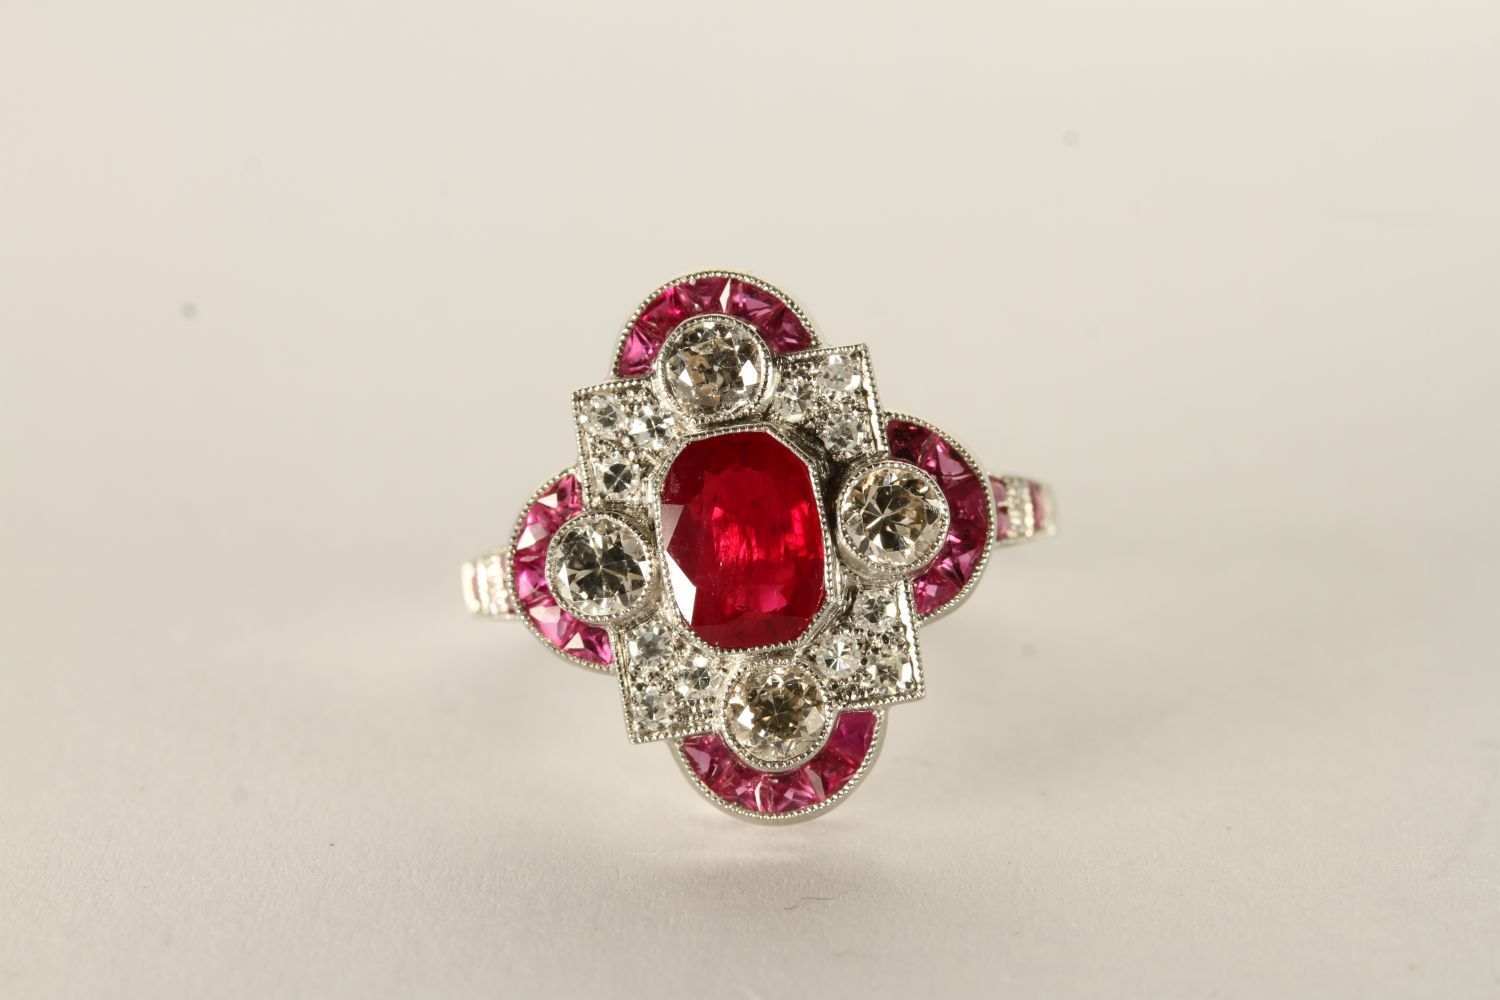 Edwardian-style platinum ruby and diamond dress ring. Central ruby 1.65ct, approx. Diamonds, 1.20